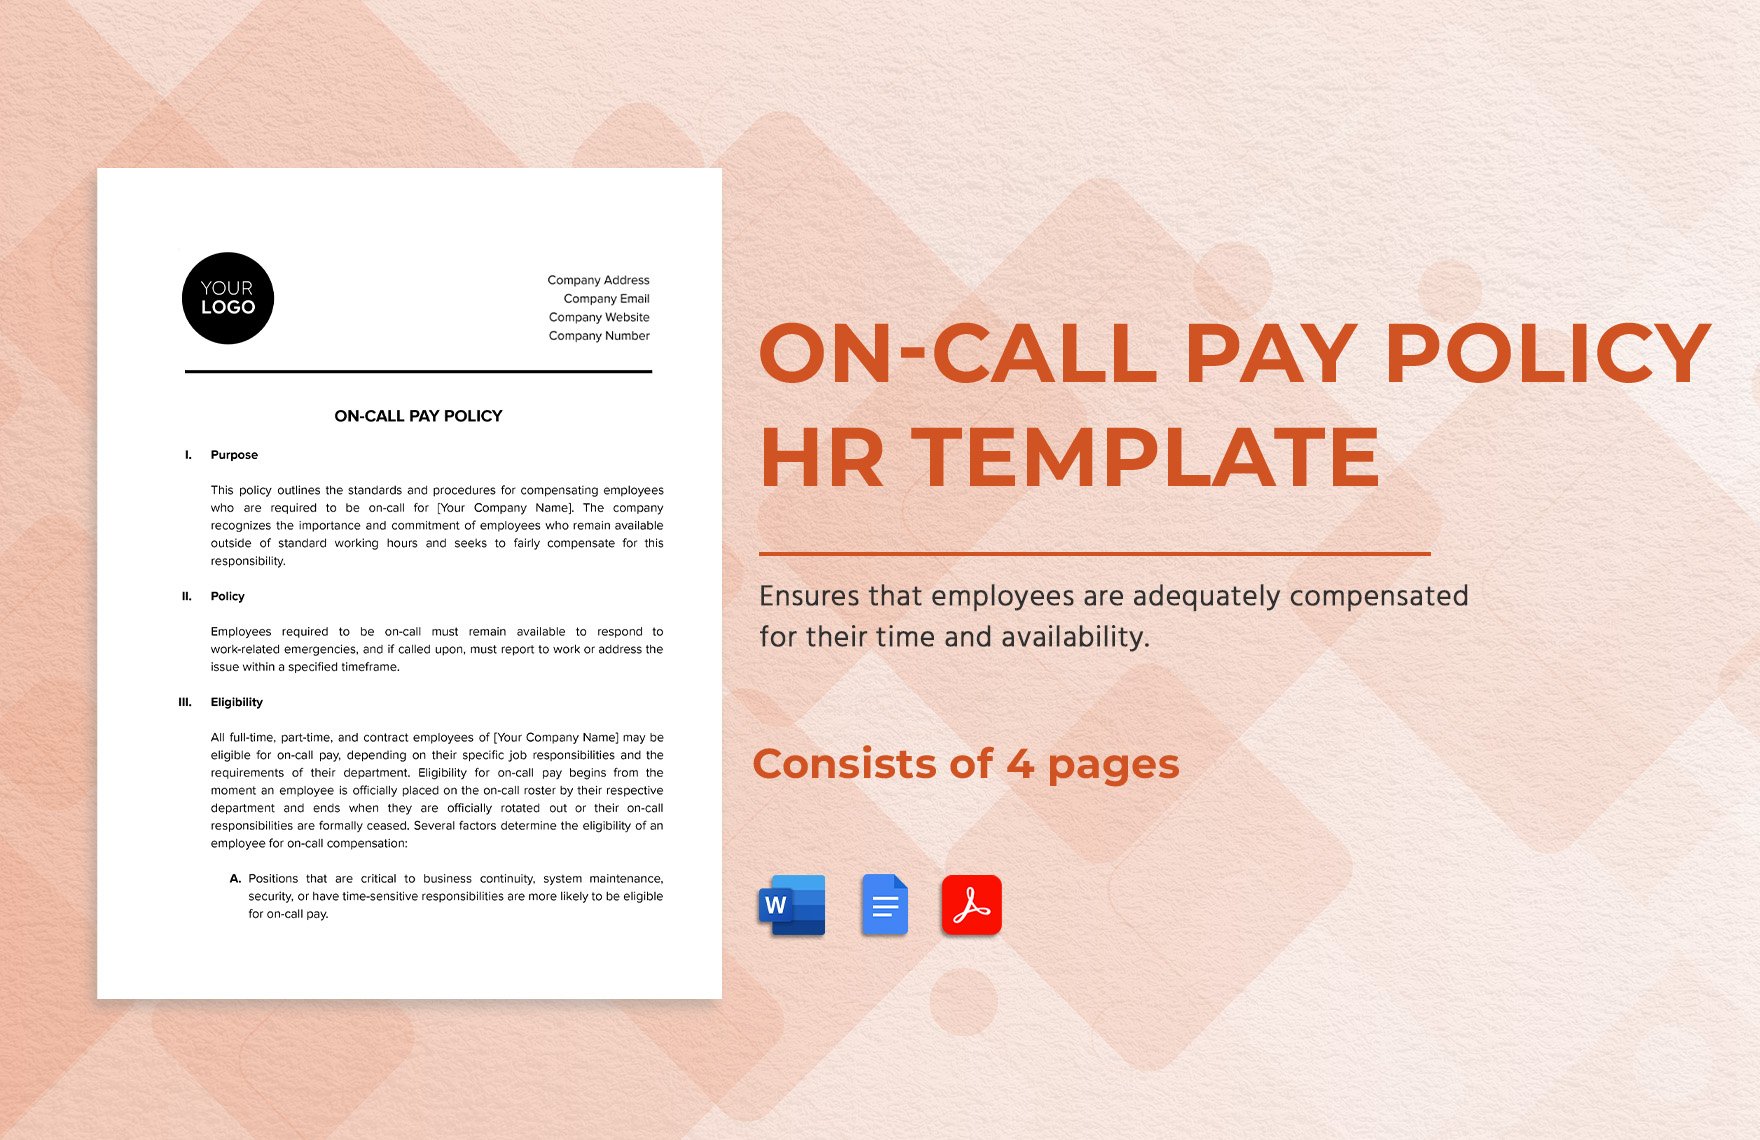 On-call Pay Policy HR Template